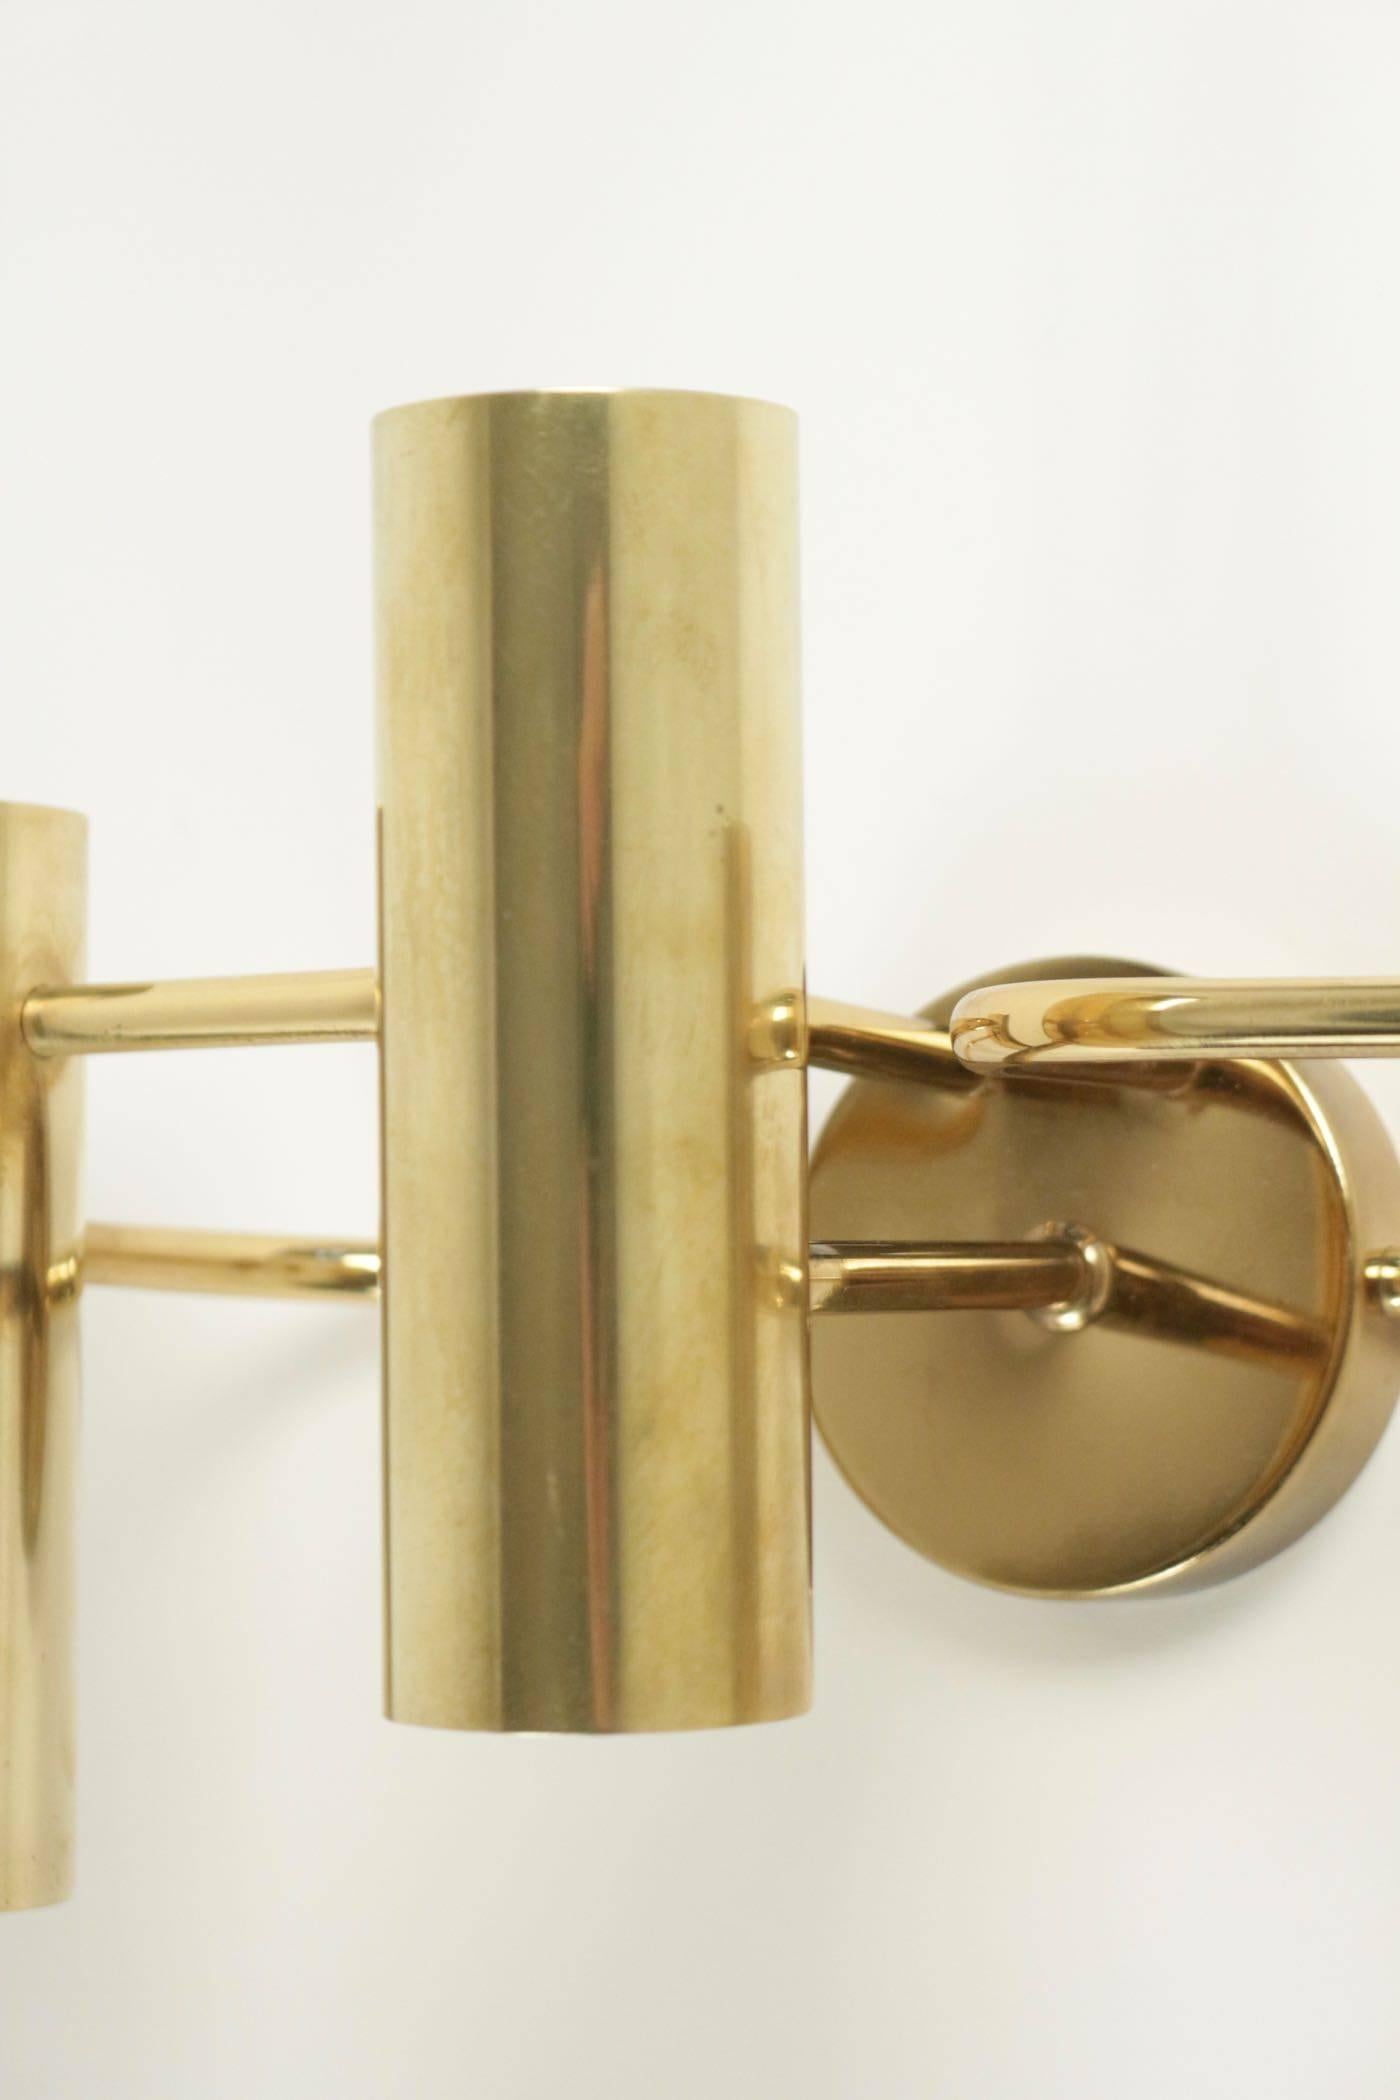 Pair of Gaetano Sciolari brass sconces from the 1960s.
The receptacles for three bulbs are made of three brass cylinders with brown patina effect mounted on curved brass arms.
Round wall plate.
Entirely in brass.

Three bulbs per sconce.